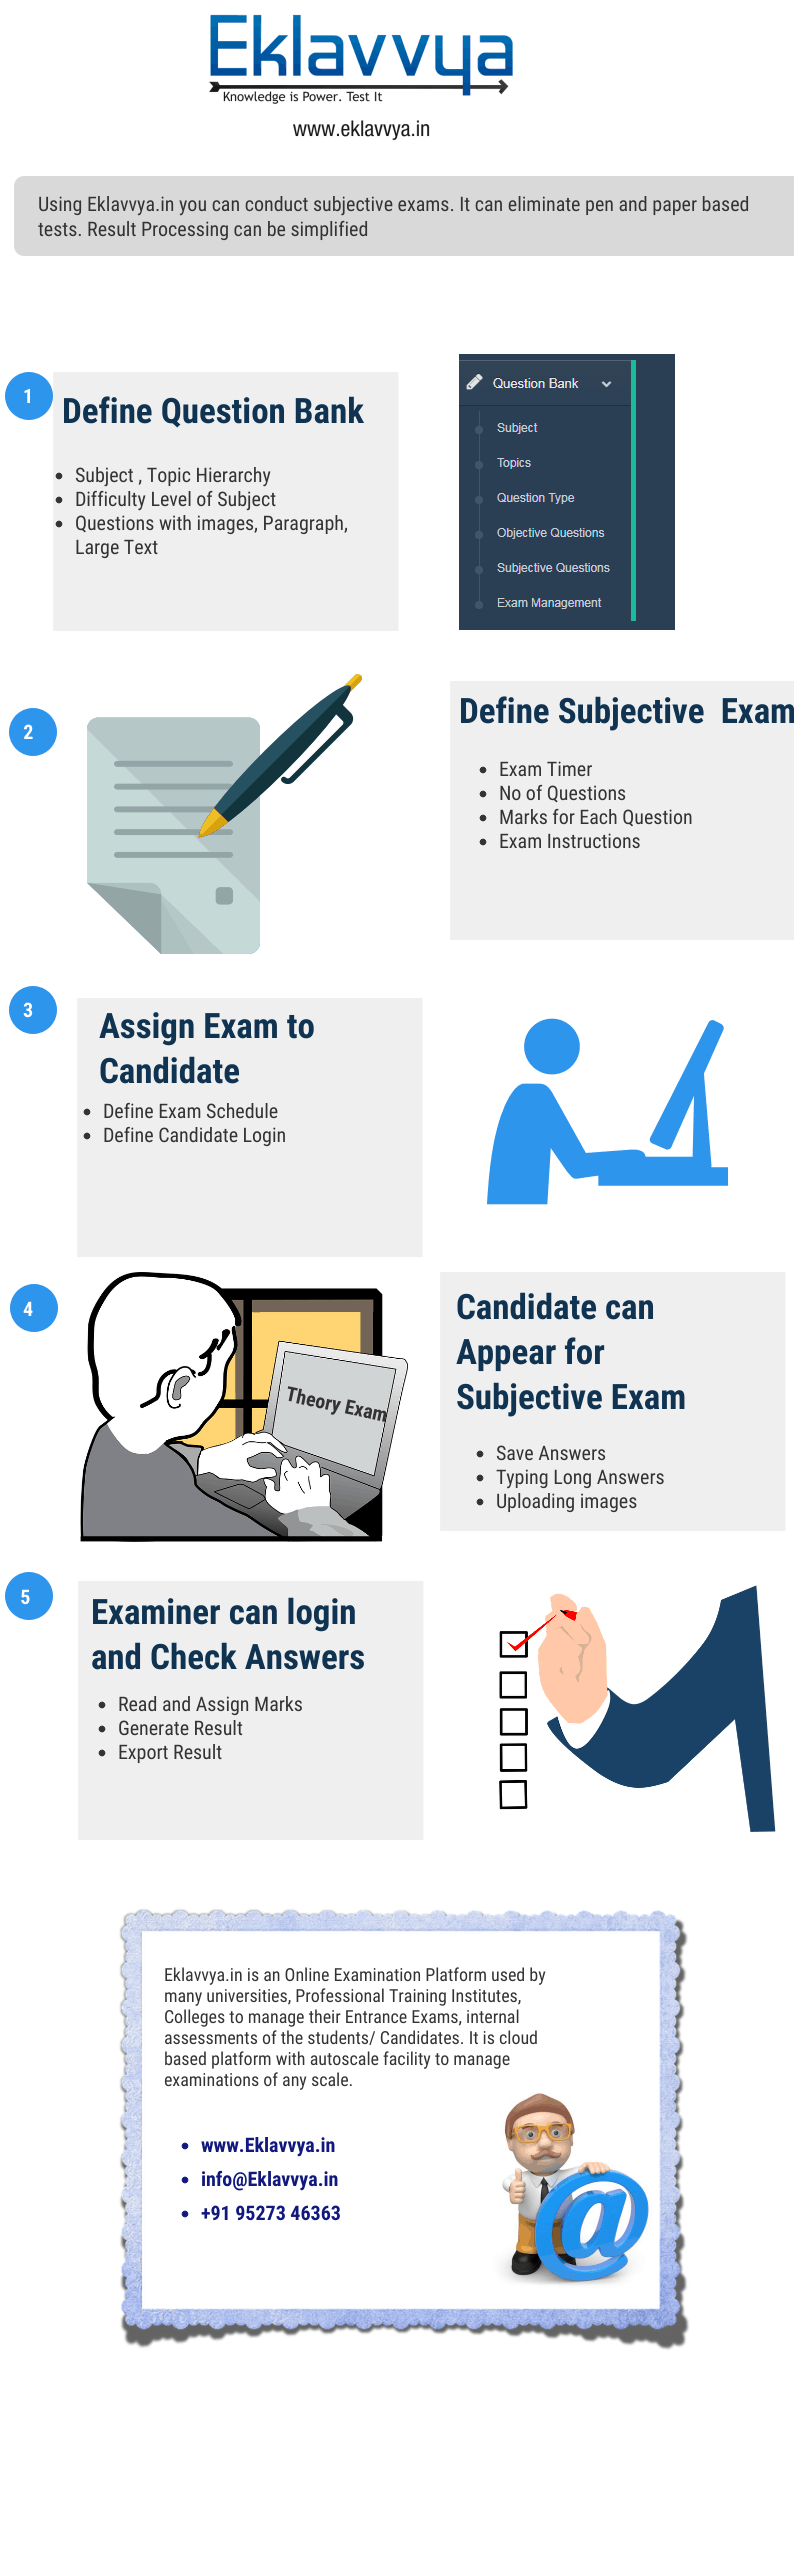 Steps to Conduct Online Subjective Exam Process